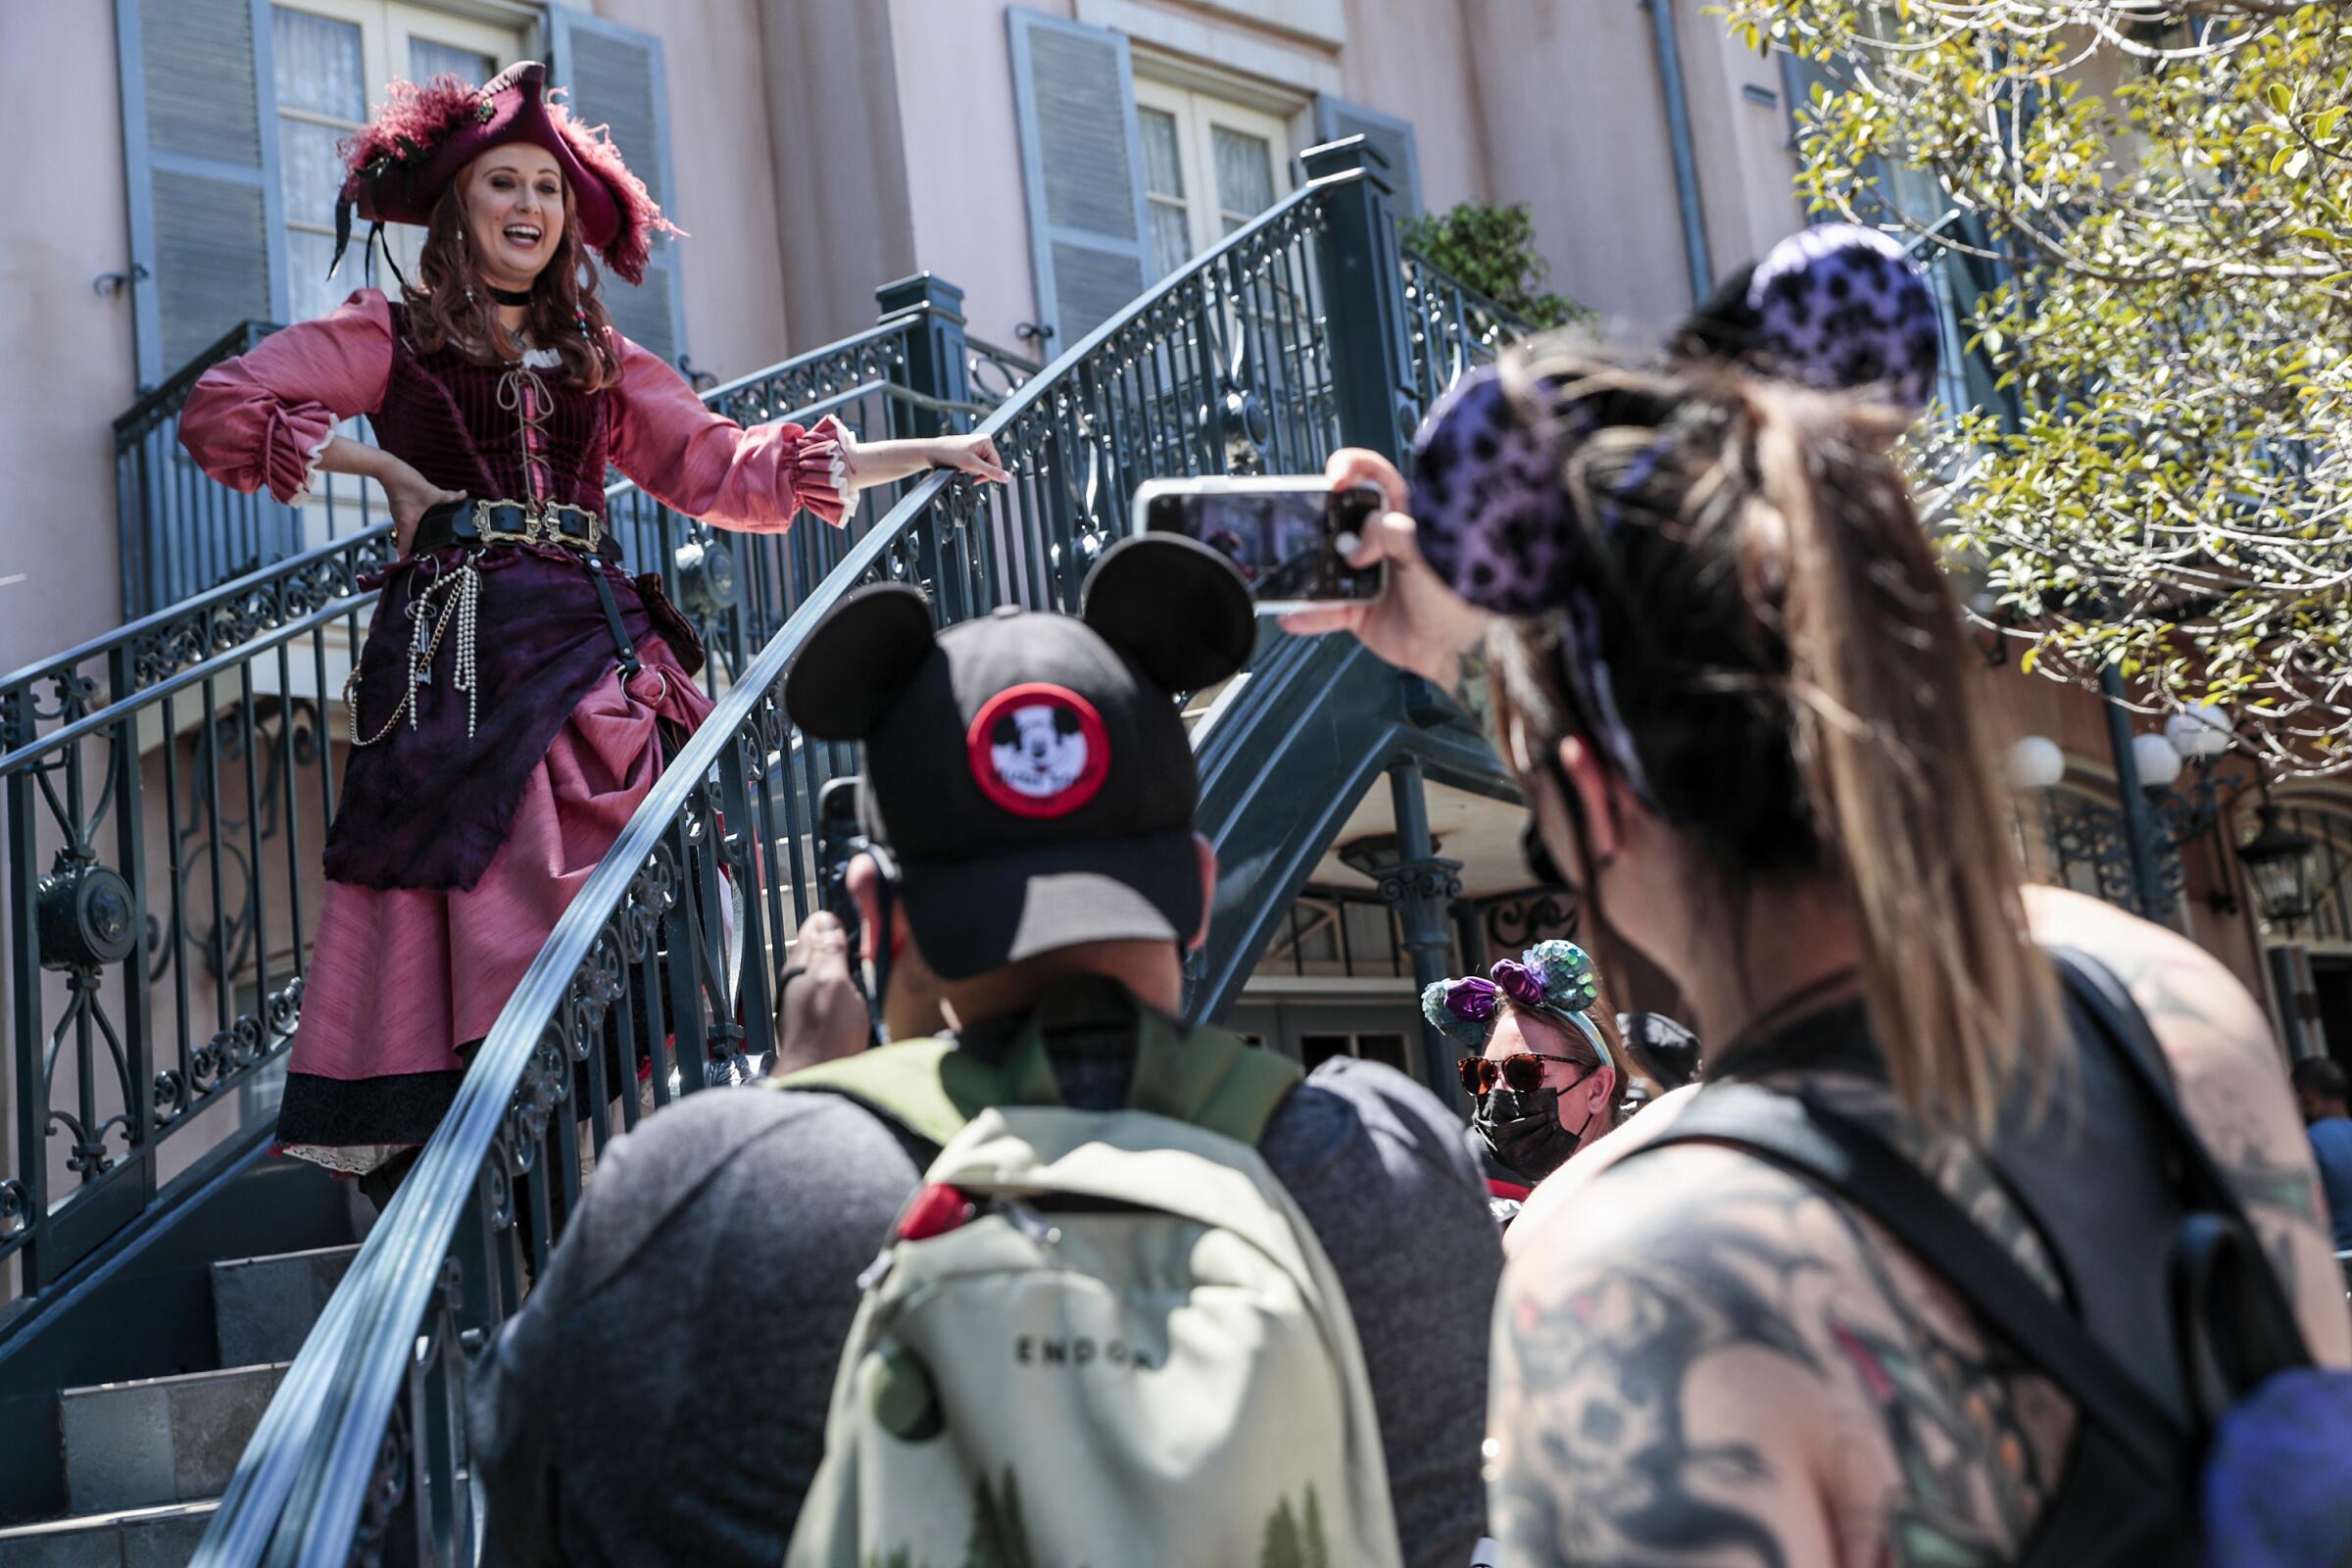 A woman in a pirate costume chats with people wearing mouse ears  